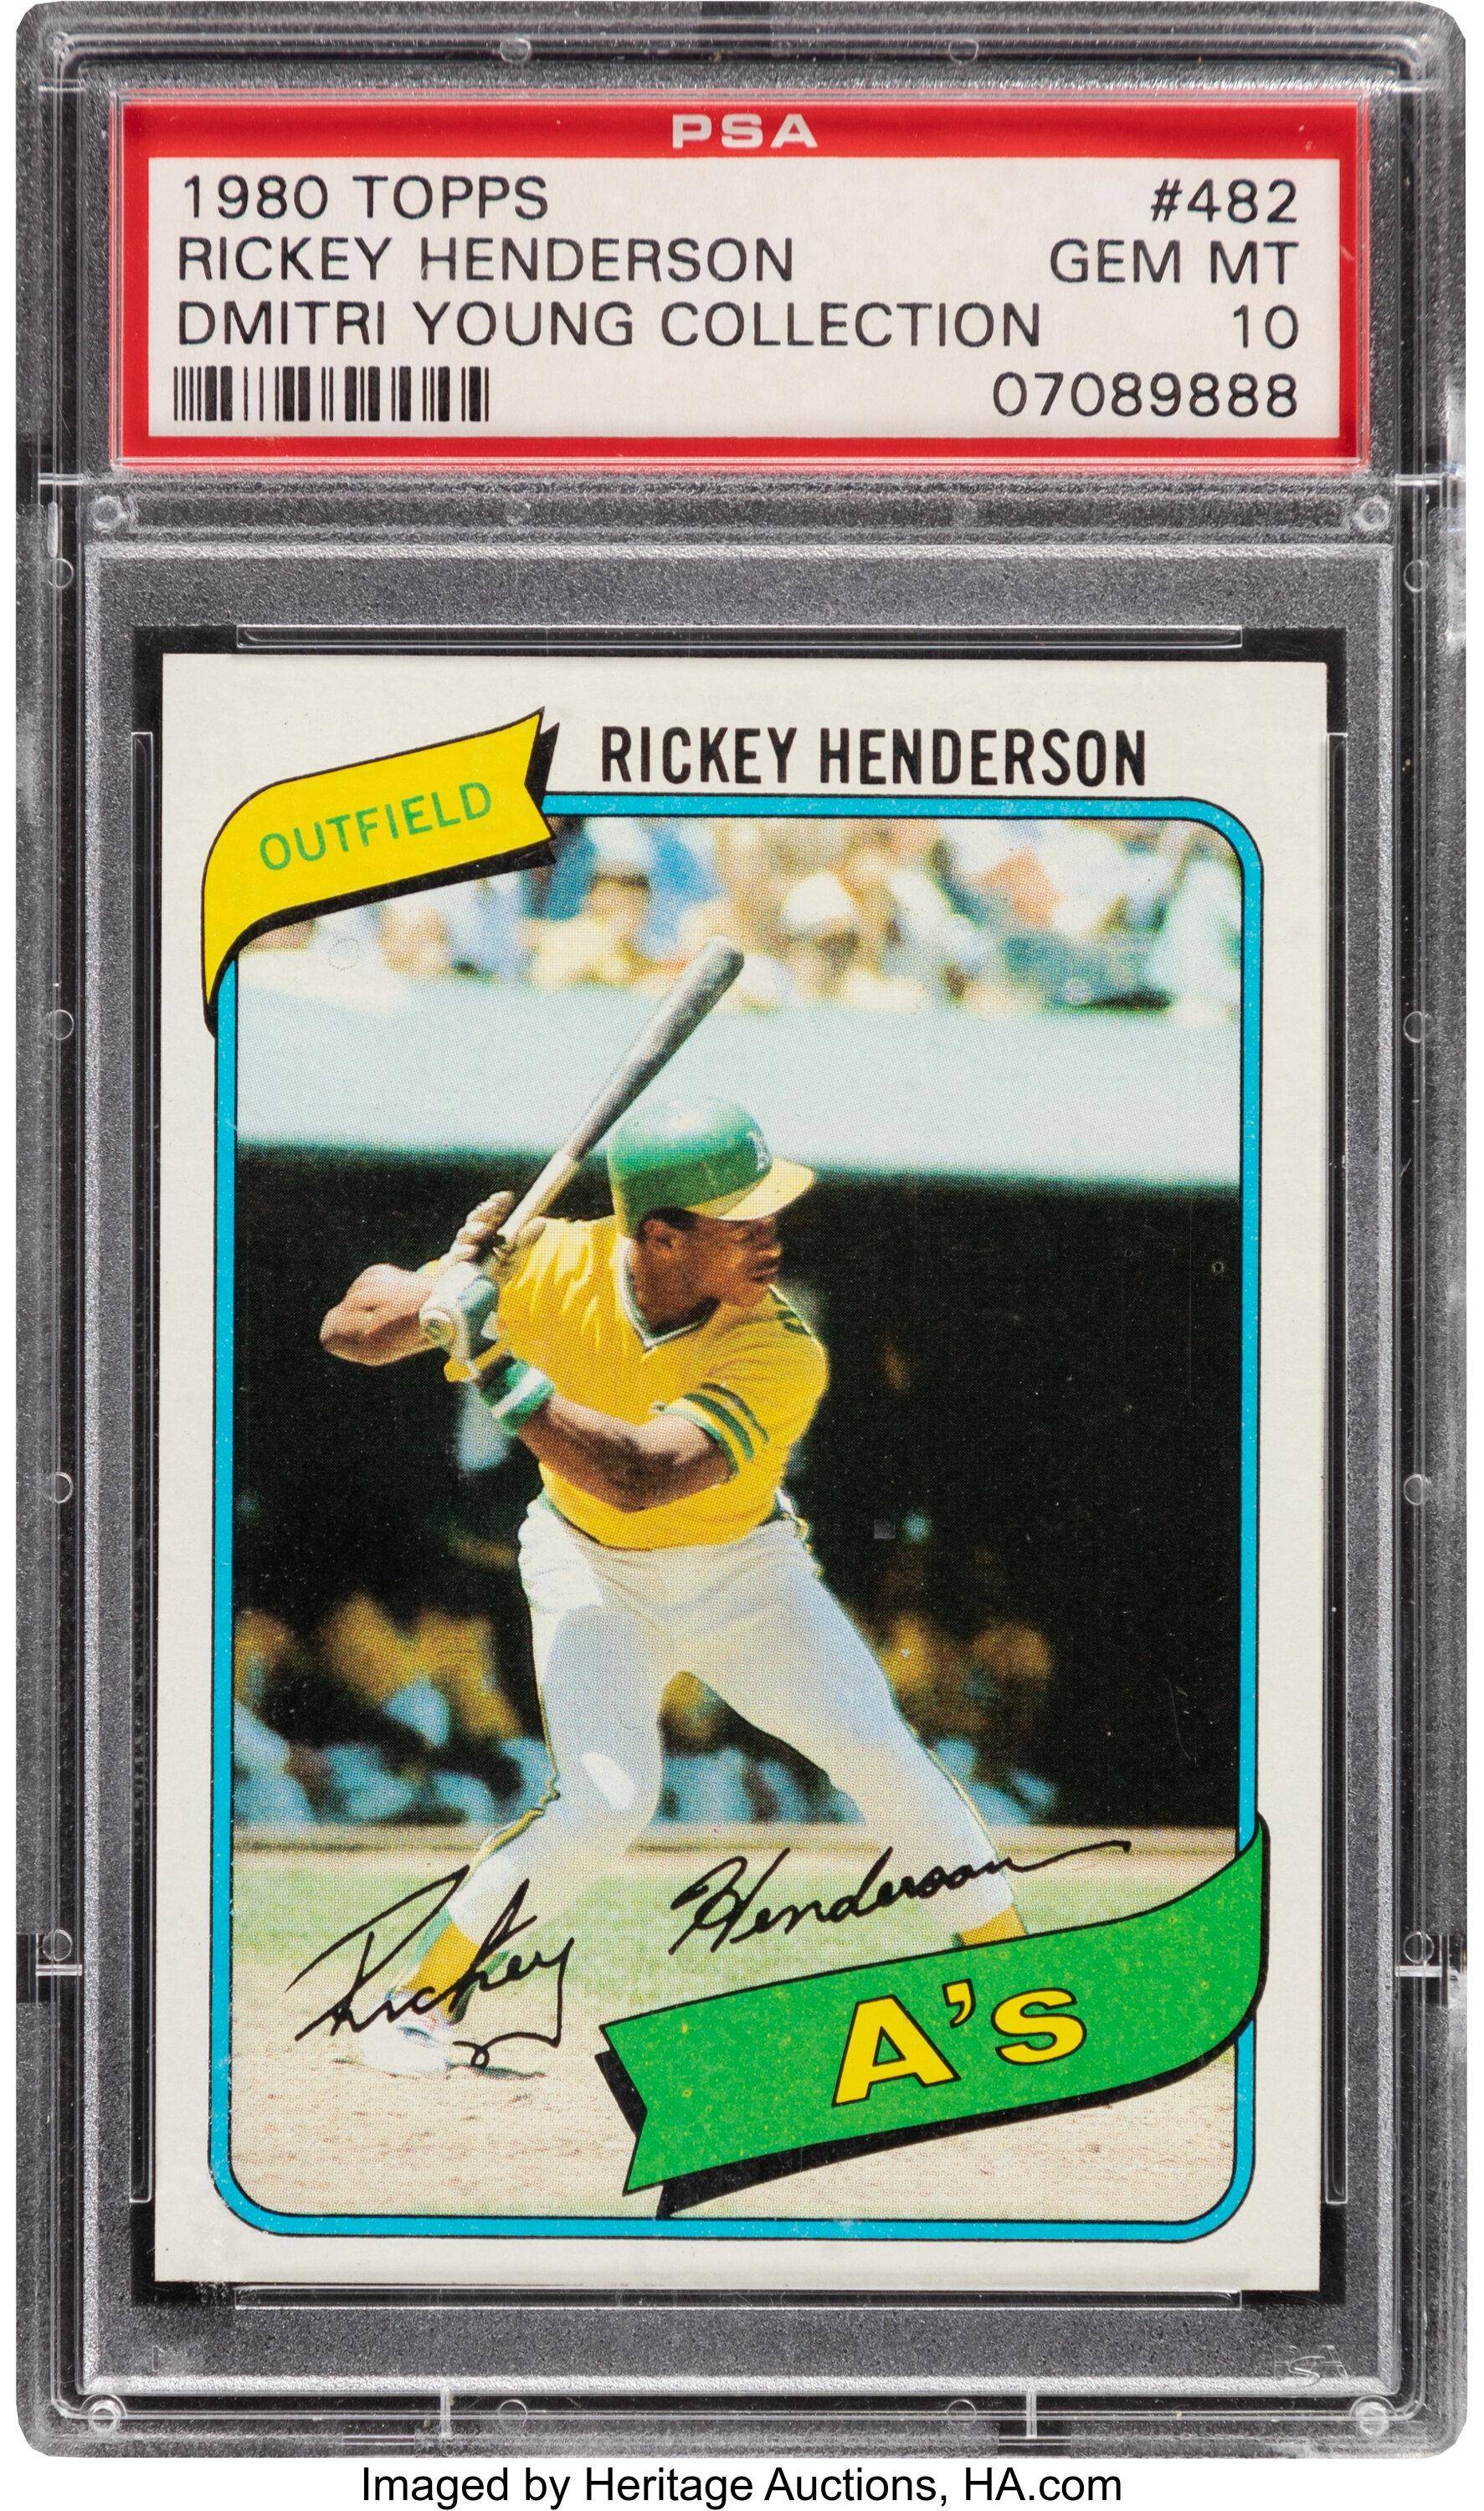 1990 Rickey Henderson World Series Game Worn Jersey, MEARS A10